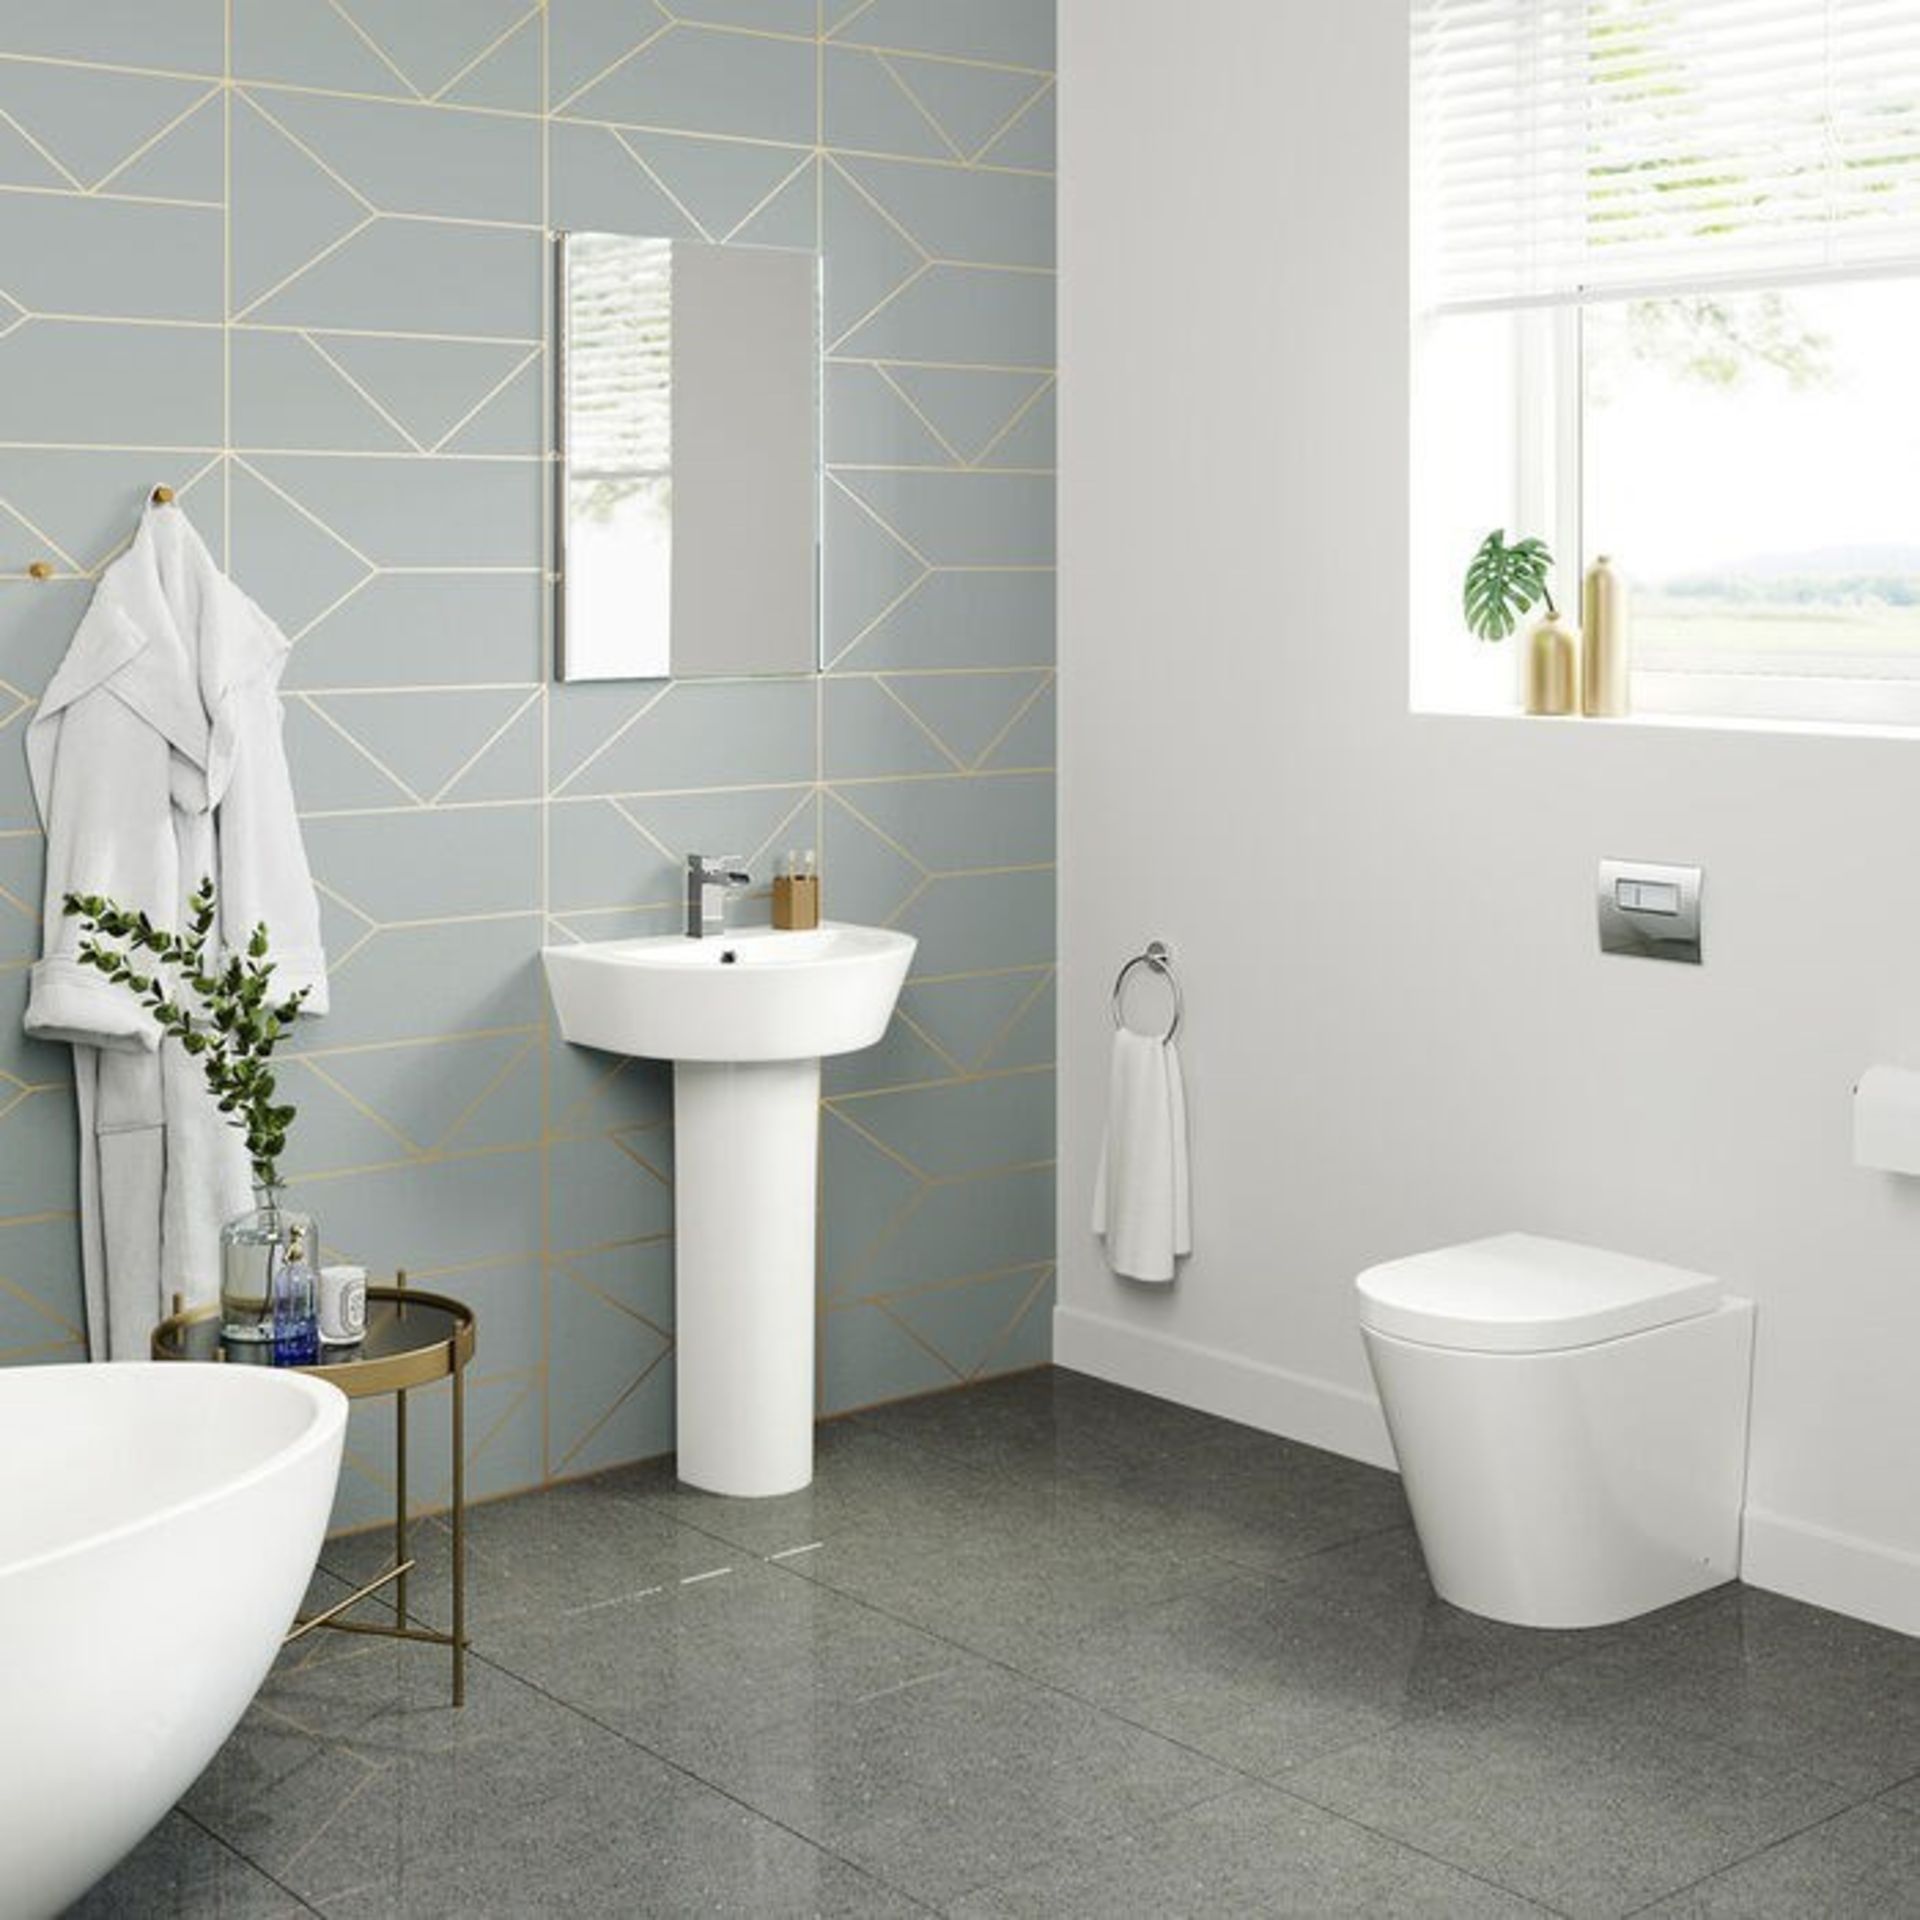 NEW & BOXED Lyon Back To Wall Toilet with Soft Close Seat. RRP £349.99 each. Our Lyon ba... - Image 2 of 2